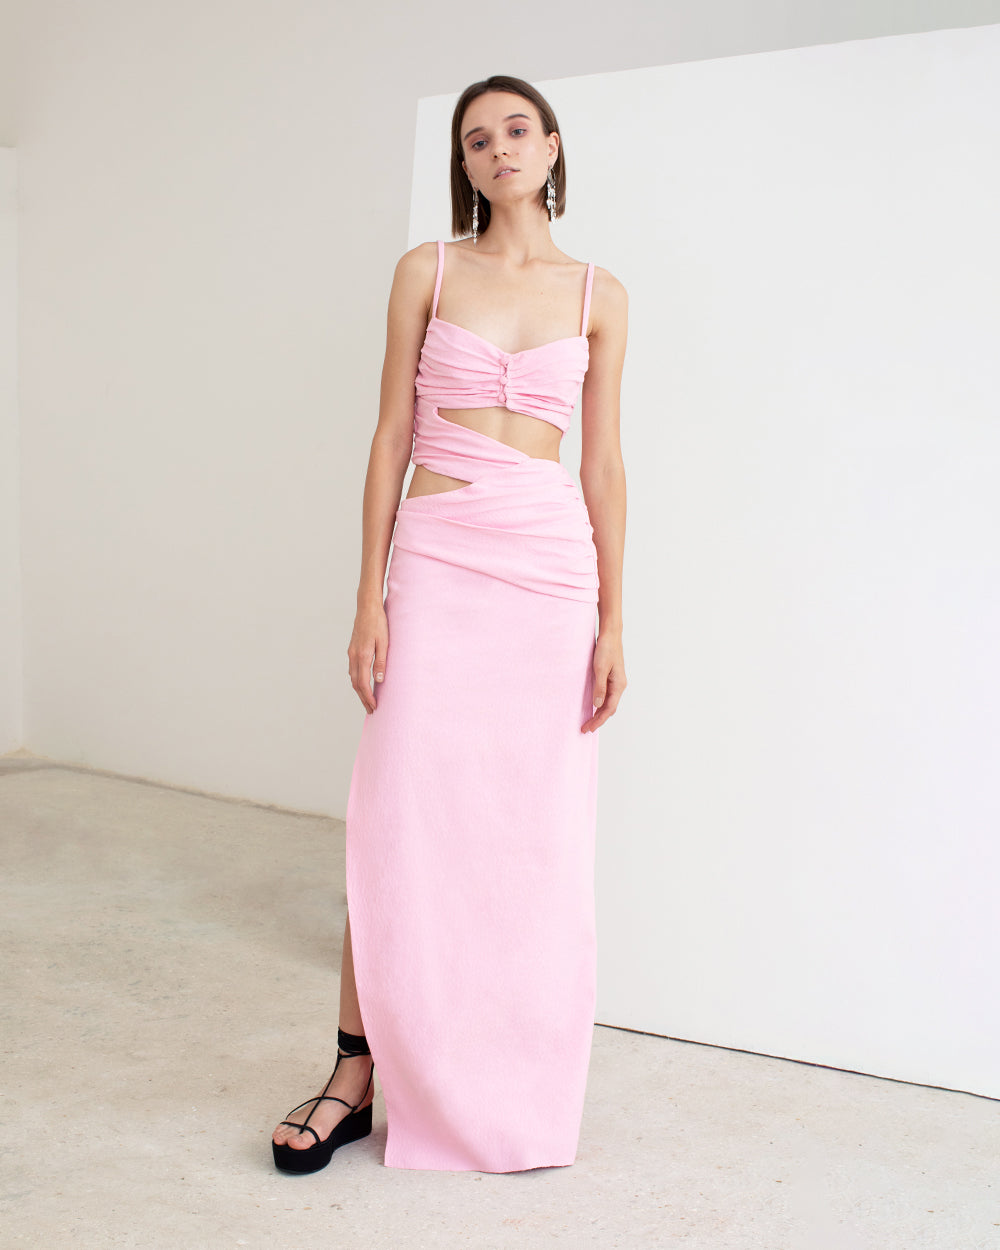 THE MAXI DRESSES YOU NEED THIS SUMMER